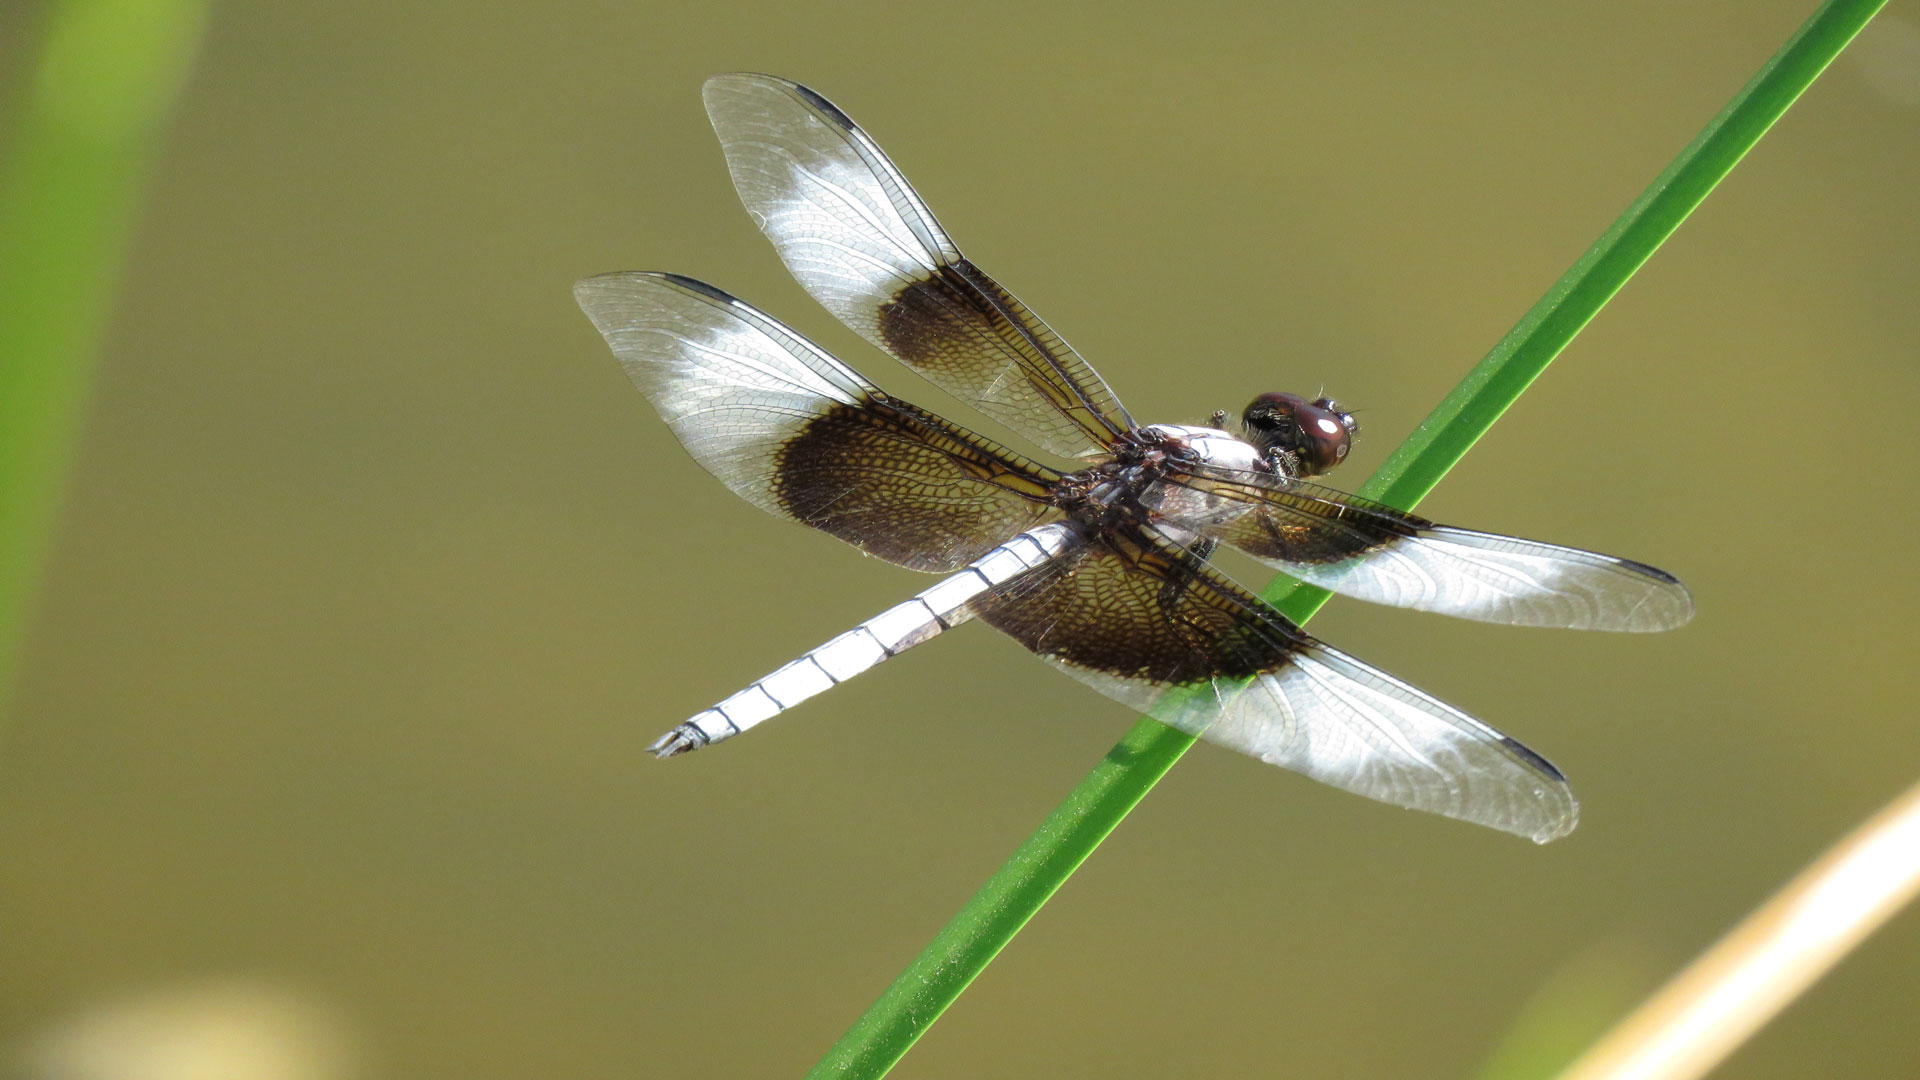 A Widow Skimmer dragonfly perches on a plant on the Santa Cruz River in Tucson, Ariz. The 2023 Dragonfly BioBlitz is hoping to document the return of insects like this to the restored Santa Cruz River.